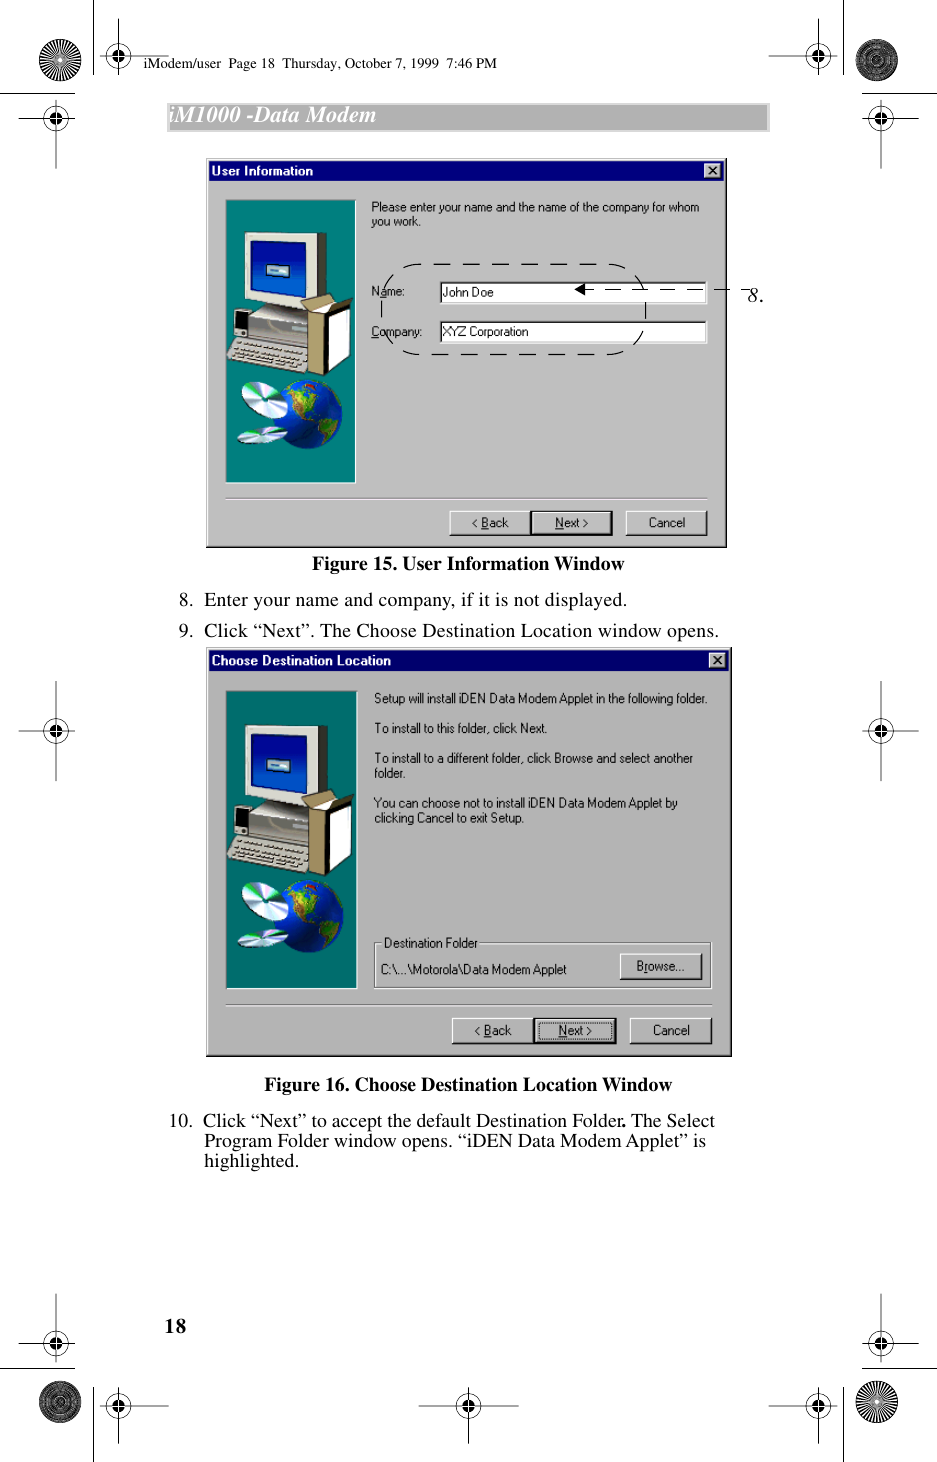 18iM1000 -Data Modem  Figure 15. User Information Window  8.  Enter your name and company, if it is not displayed.  9.  Click “Next”. The Choose Destination Location window opens.Figure 16. Choose Destination Location Window10.  Click “Next” to accept the default Destination Folder. The Select Program Folder window opens. “iDEN Data Modem Applet” is highlighted. 8.iModem/user  Page 18  Thursday, October 7, 1999  7:46 PM